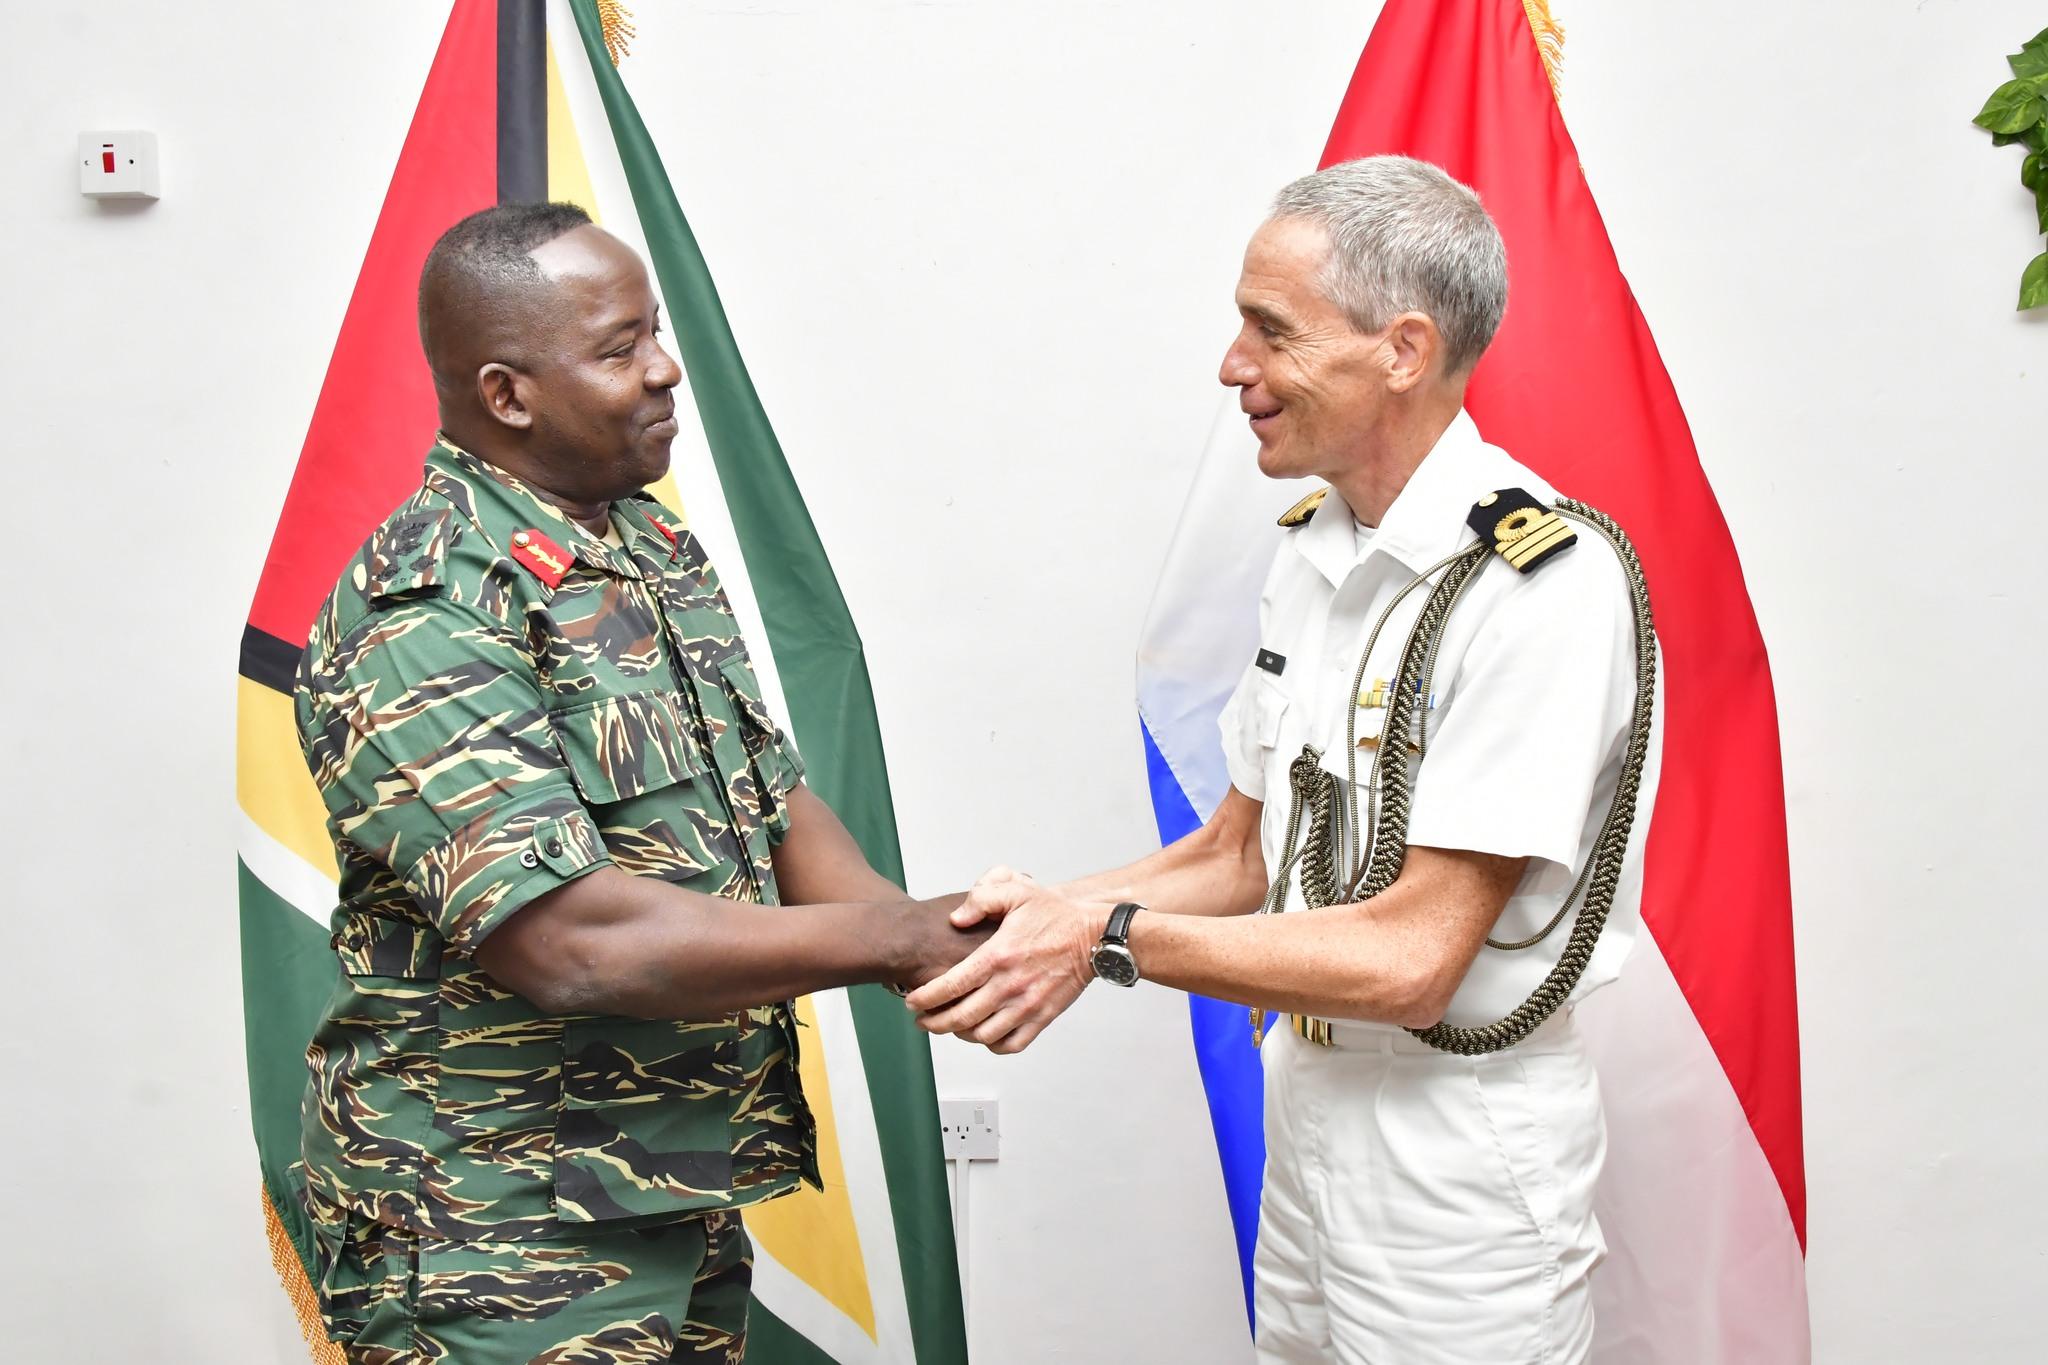 Chief of Staff of the Guyana Defence Force, Brigadier Godfrey Bess greets Commander (Navy) Geordie Klein, the Kingdom of the Netherlands’ Defence Attaché for Suriname and Guyana (Photo courtesy of the Guyana Defence Force)